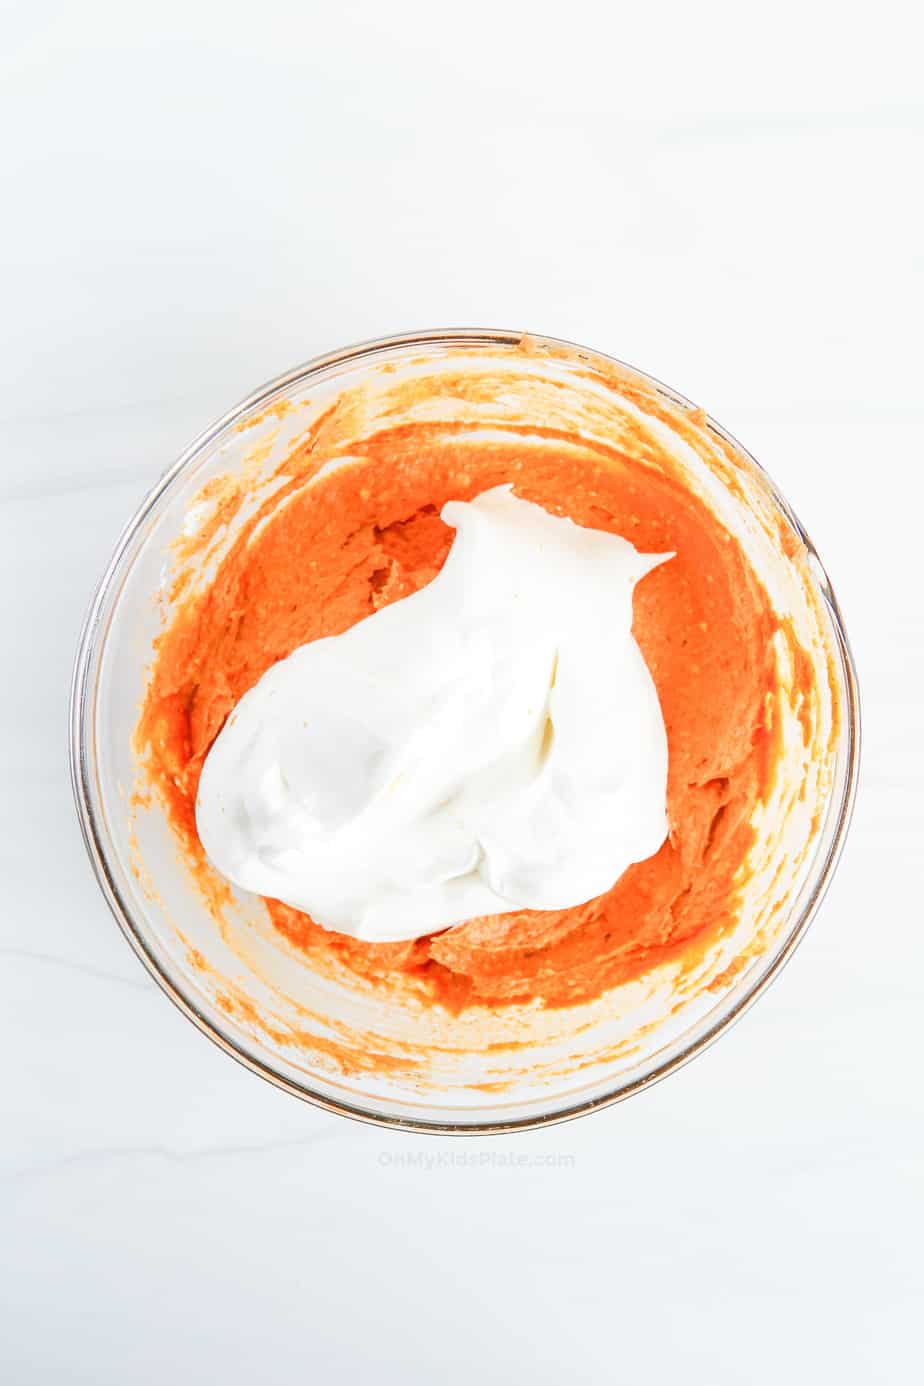 Adding whipped topping and mixing in to the pumpkin dip